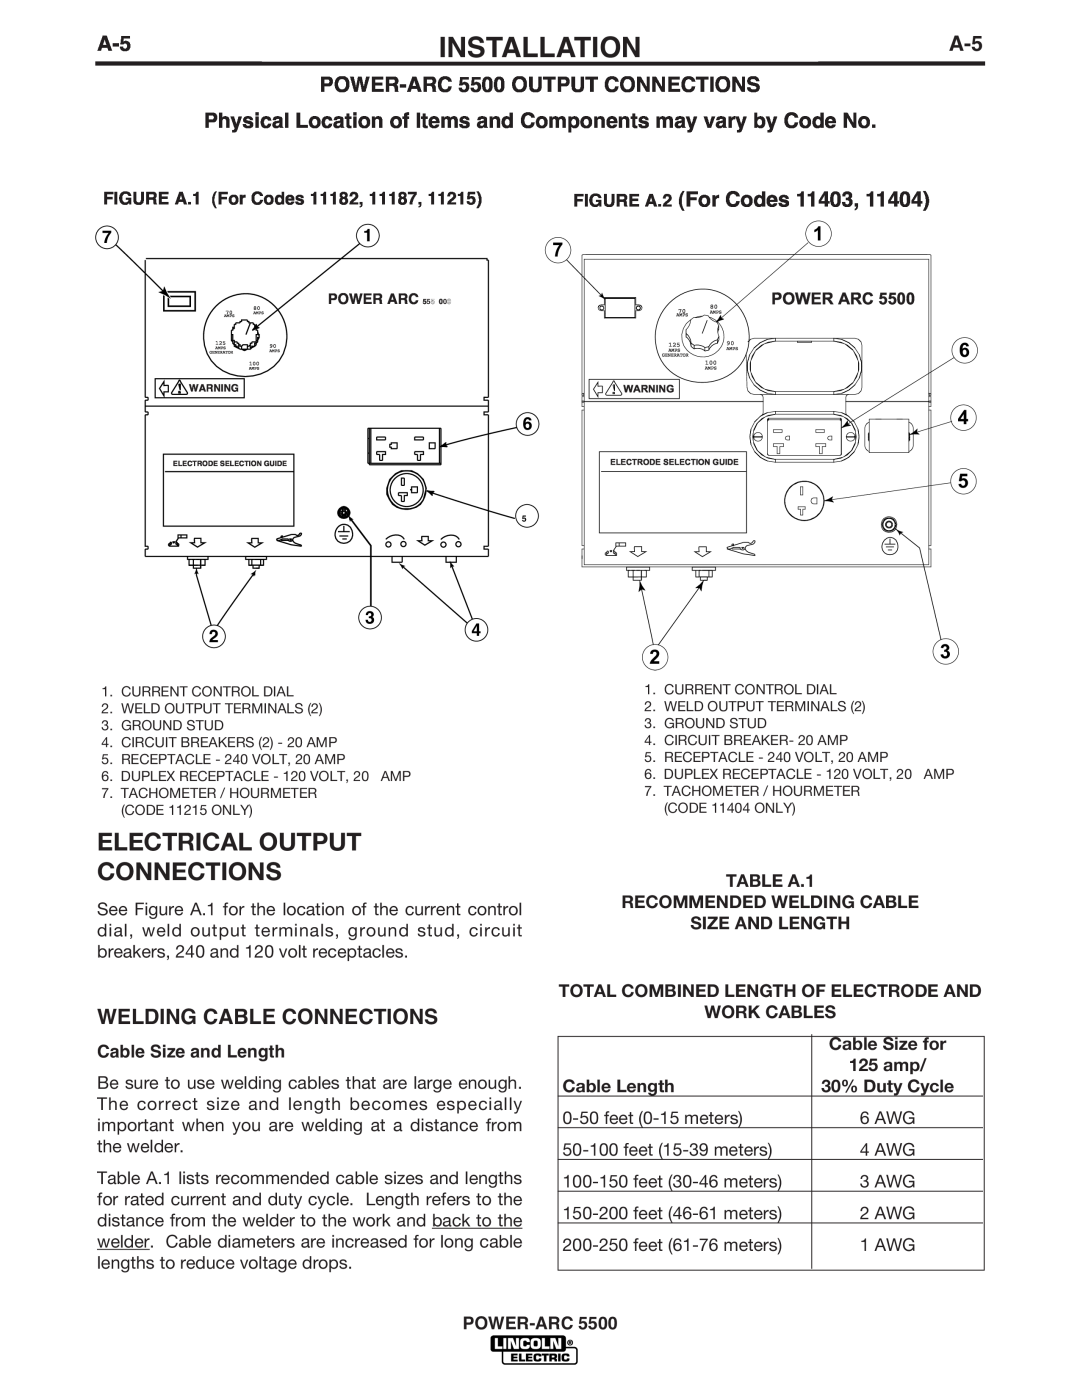 Lincoln Electric IM871-A manual Electrical Output Connections, POWER-ARC5500 OUTPUT CONNECTIONS, FIGURE A.2 For Codes 11403 